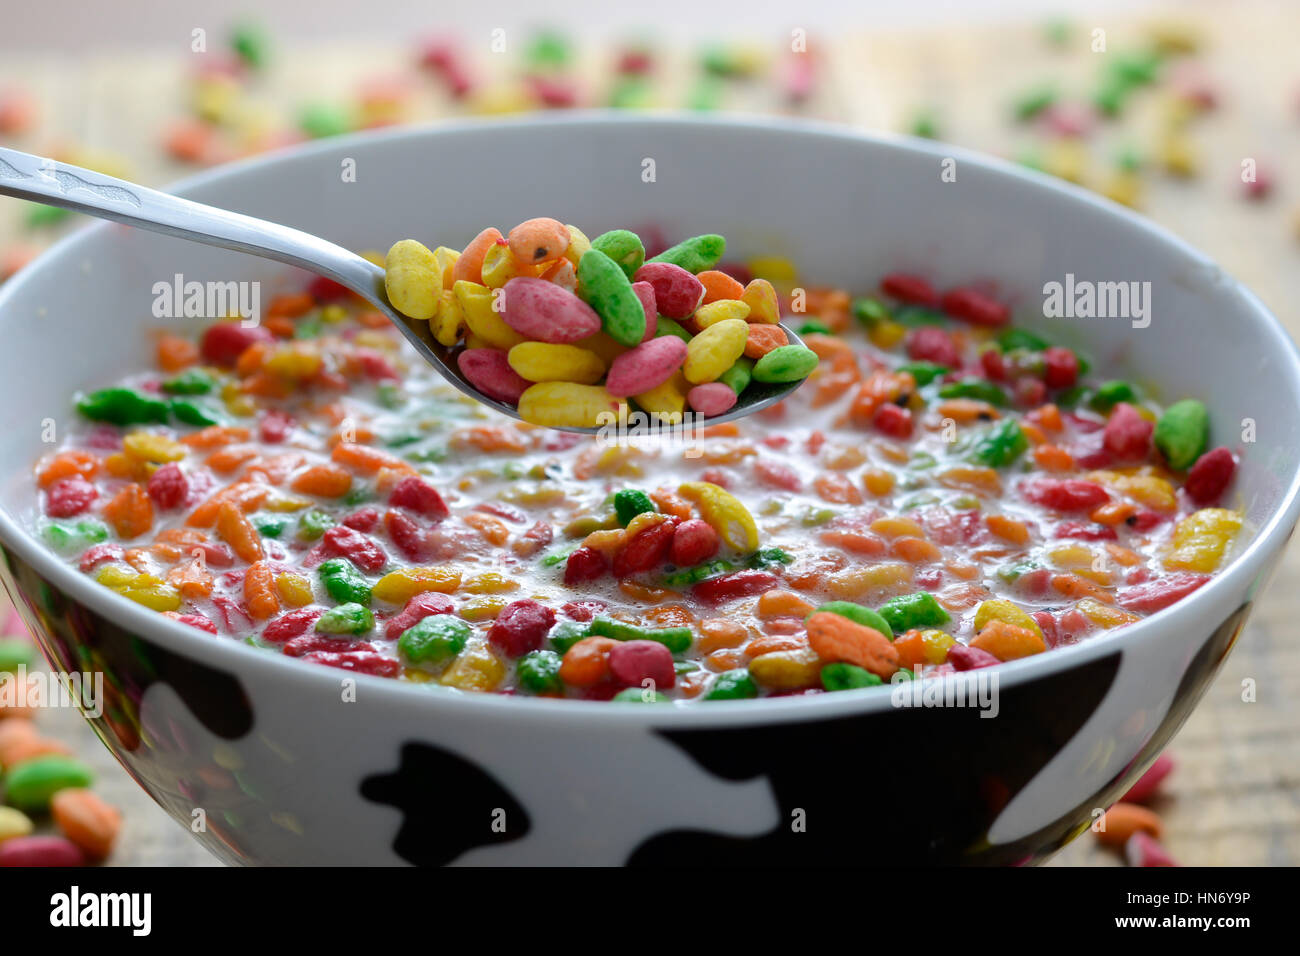 Prepared breakfast with colorful puffed rice with spilled rice in the background Stock Photo